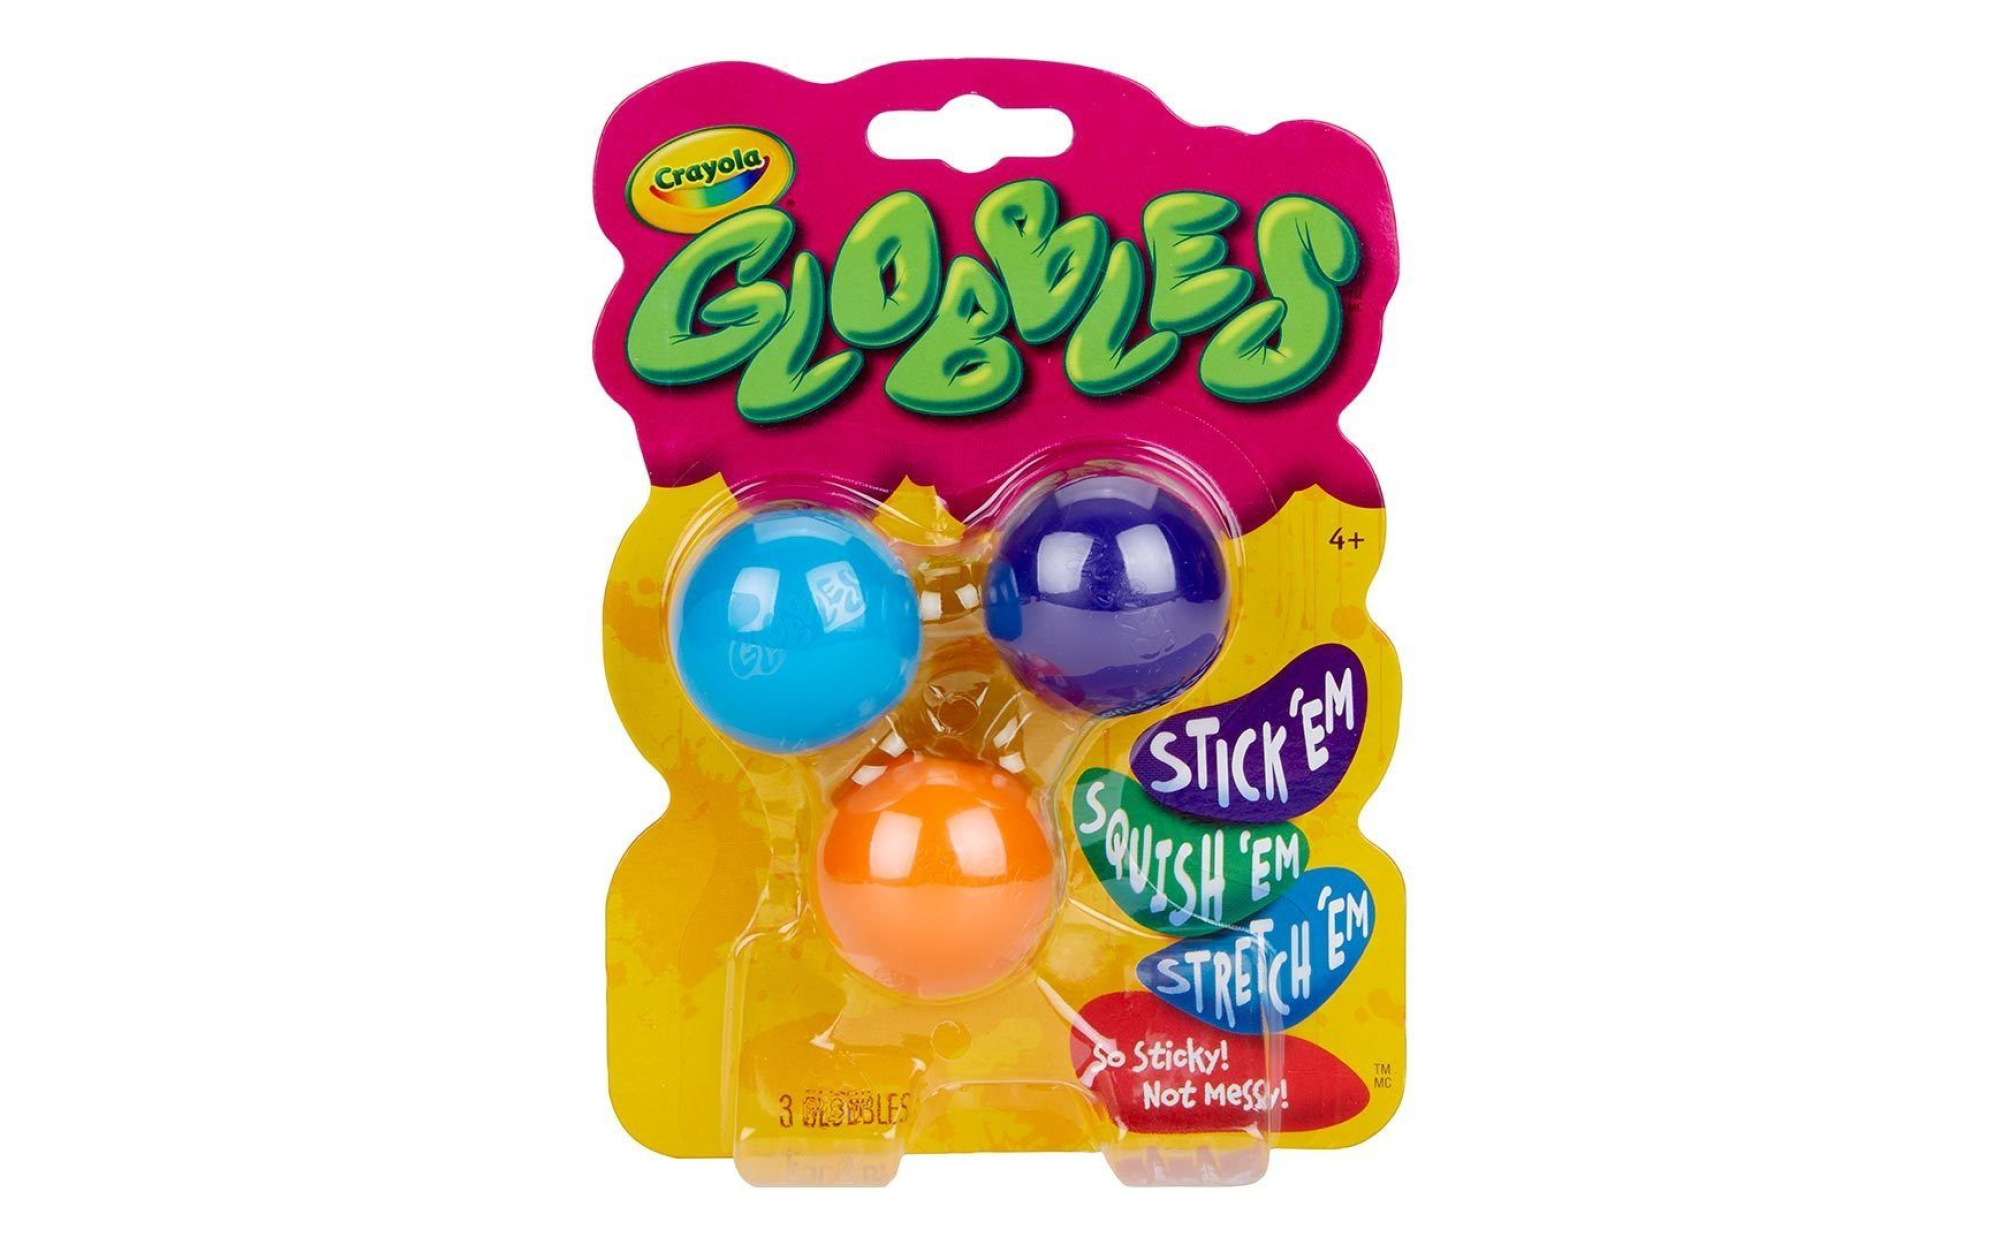  Crayola 74-7291 Globbles 3 in a Package, Assorted